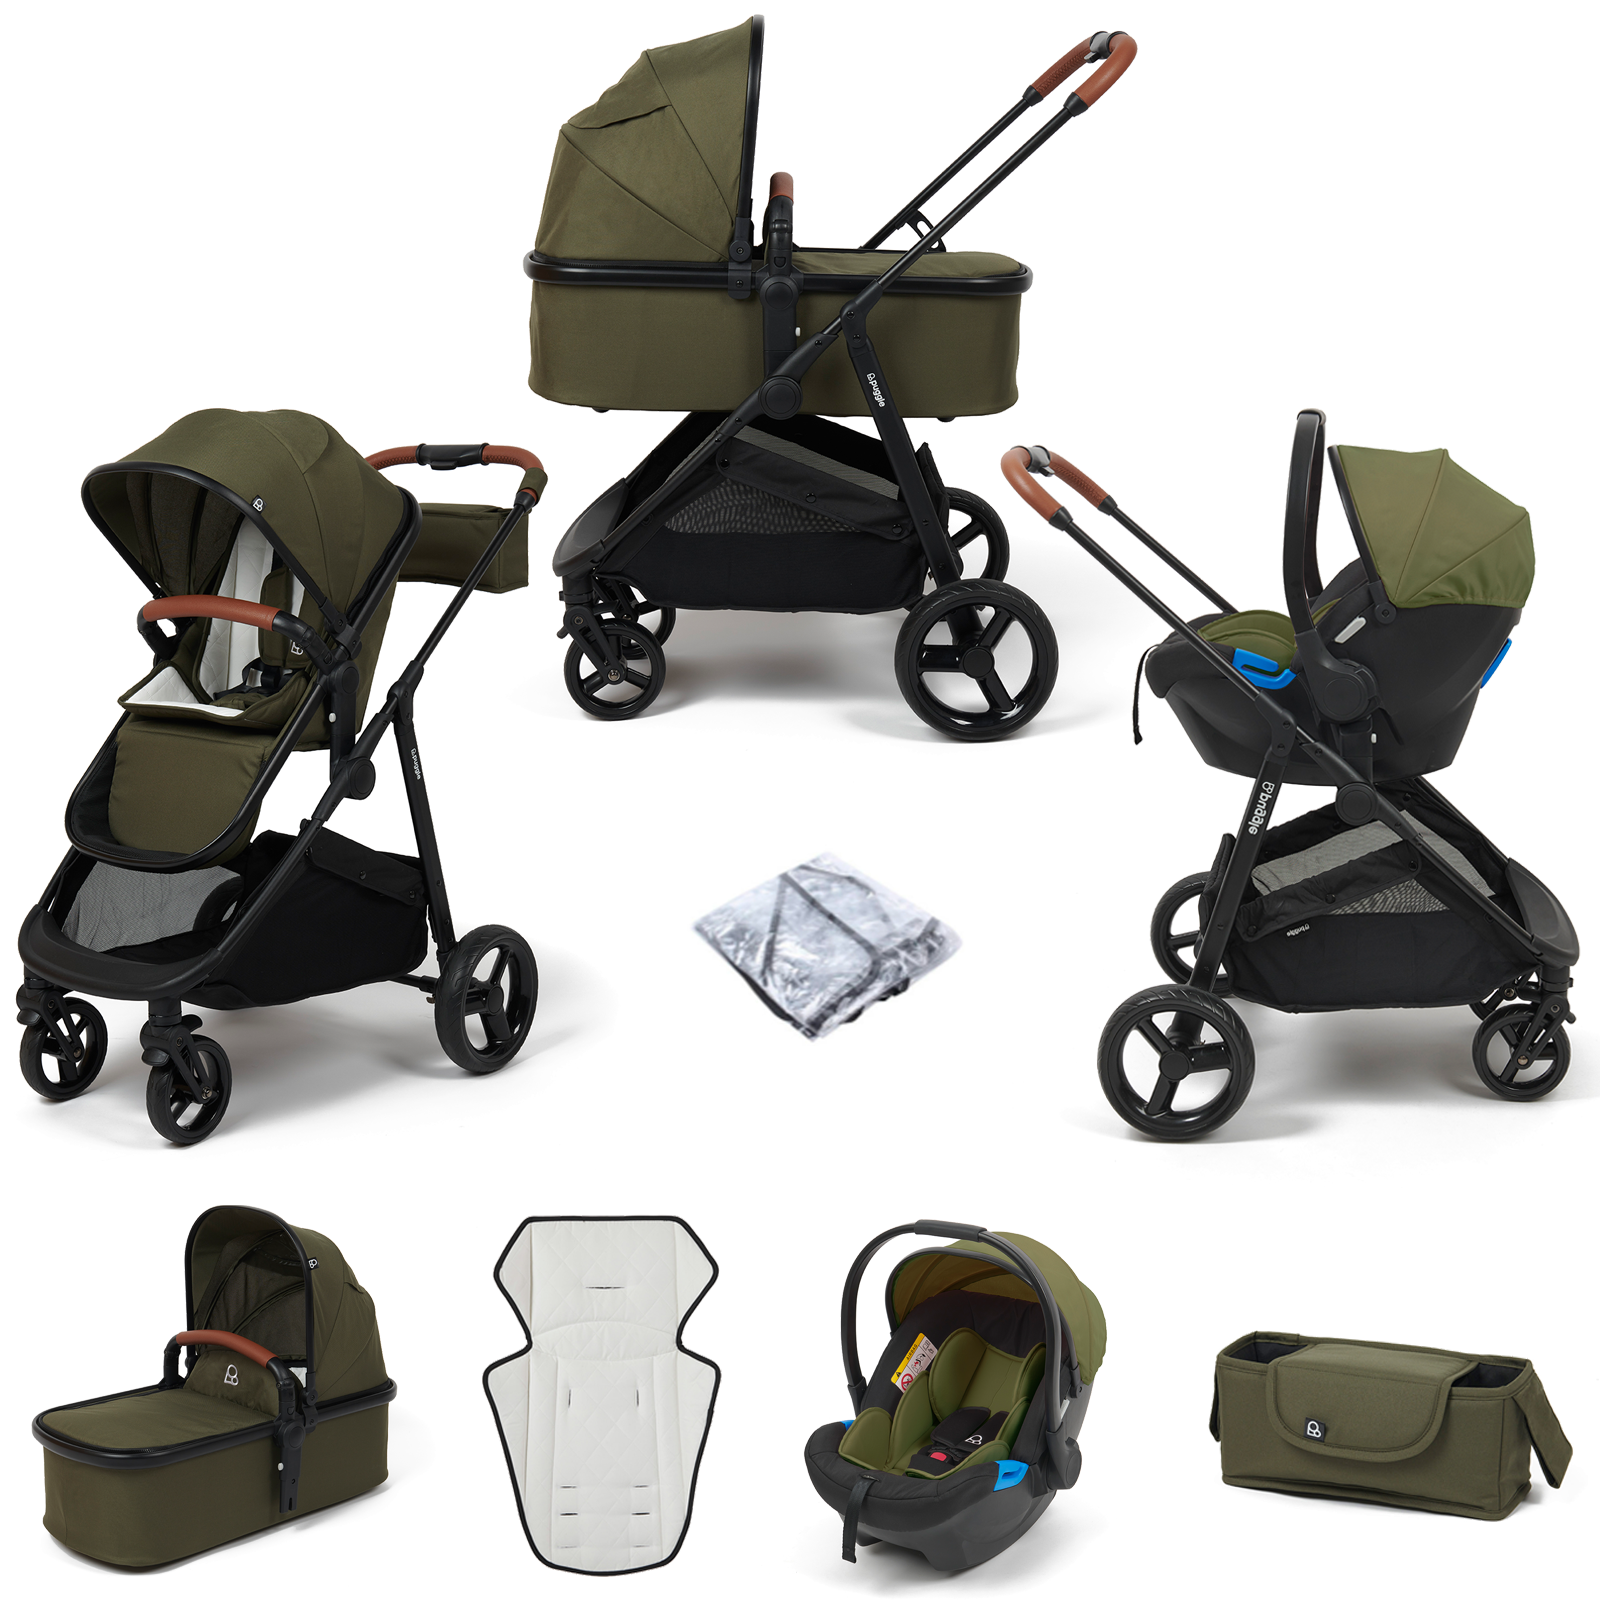 Puggle Monaco XT 3in1 Travel System with Organiser - Forest Green